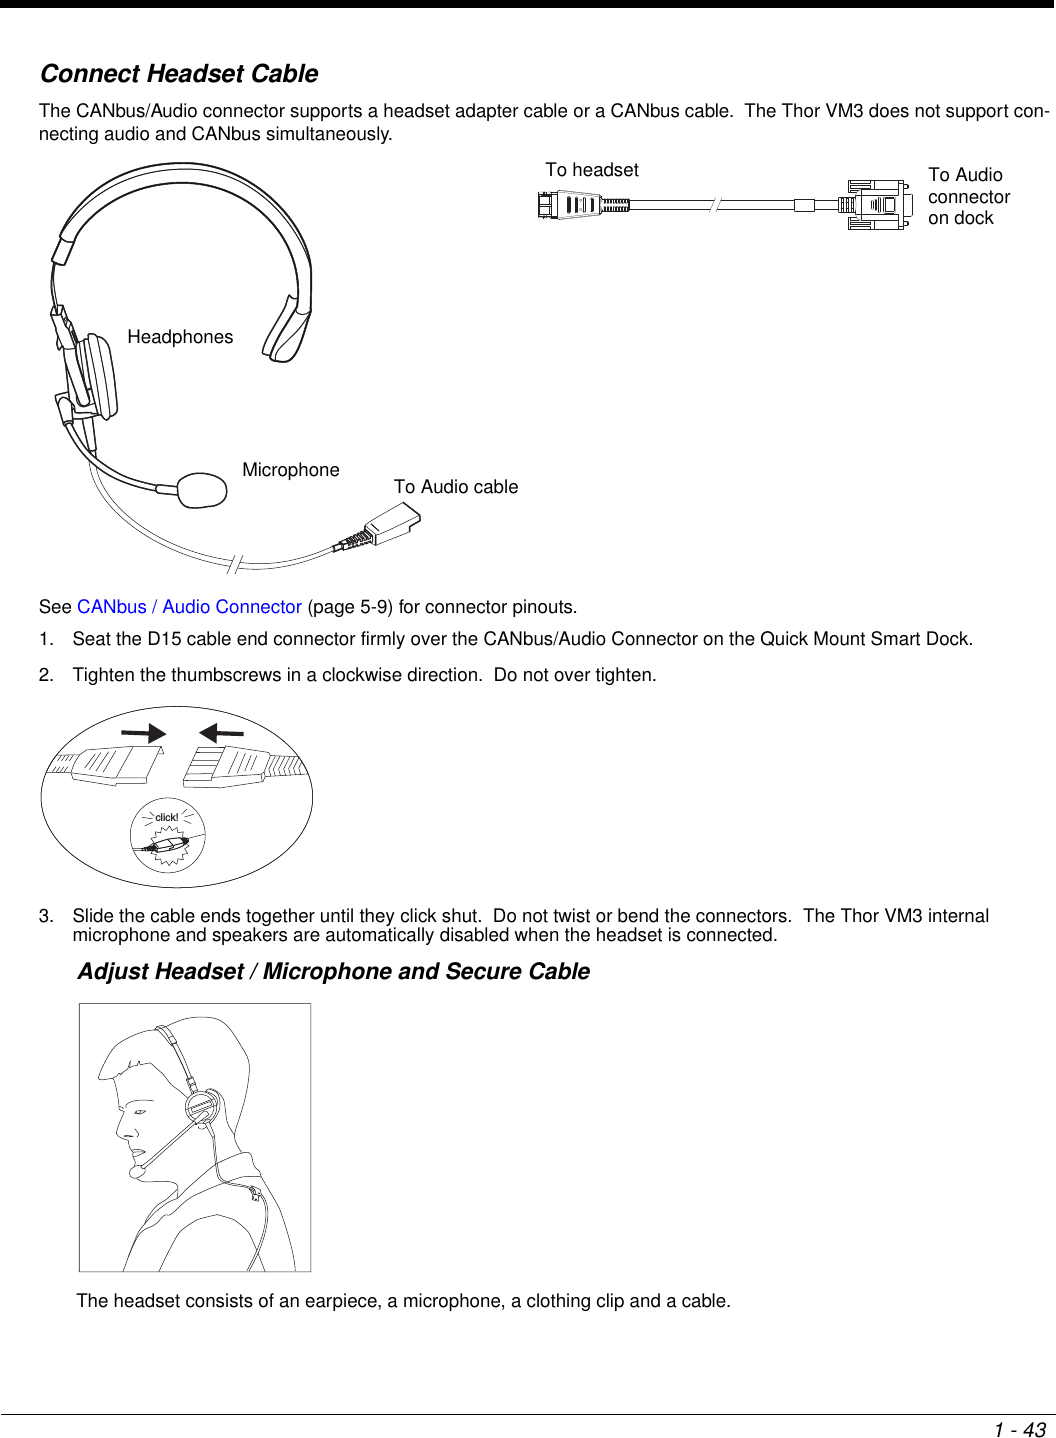 1 - 43Connect Headset CableThe CANbus/Audio connector supports a headset adapter cable or a CANbus cable.  The Thor VM3 does not support con-necting audio and CANbus simultaneously.See CANbus / Audio Connector (page 5-9) for connector pinouts.1. Seat the D15 cable end connector firmly over the CANbus/Audio Connector on the Quick Mount Smart Dock.2. Tighten the thumbscrews in a clockwise direction.  Do not over tighten.3. Slide the cable ends together until they click shut.  Do not twist or bend the connectors.  The Thor VM3 internal microphone and speakers are automatically disabled when the headset is connected.Adjust Headset / Microphone and Secure CableThe headset consists of an earpiece, a microphone, a clothing clip and a cable.HeadphonesMicrophone To Audio cableTo Audio connectoron dockTo headsetclick!